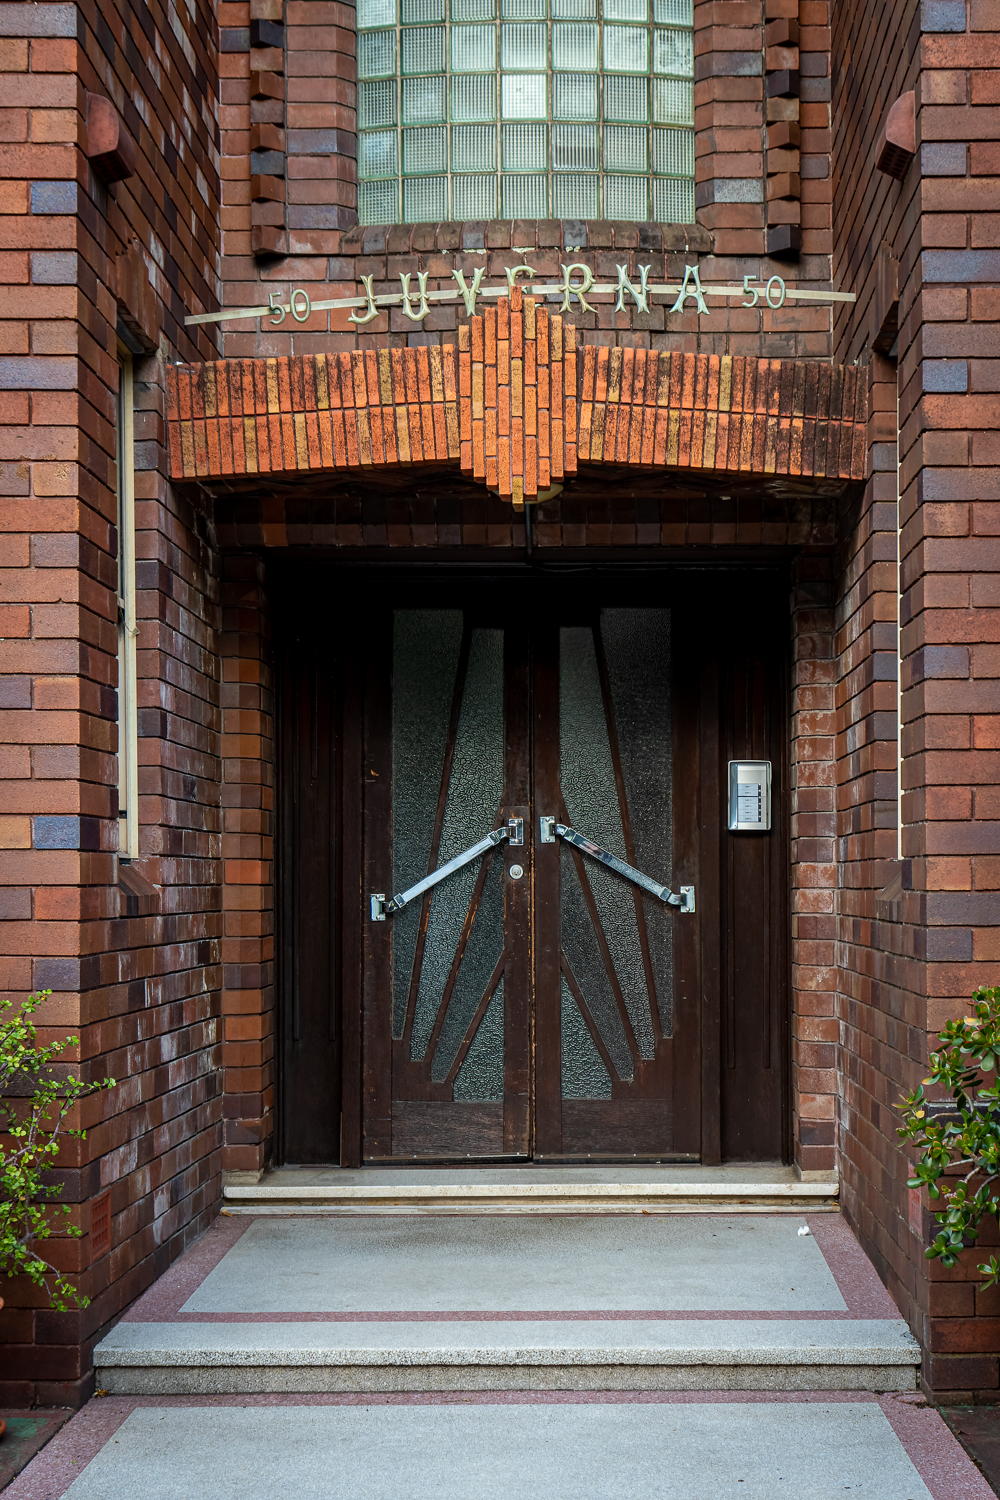 A wooden art deco door withi a red brick doorway with the word Juverna along the top